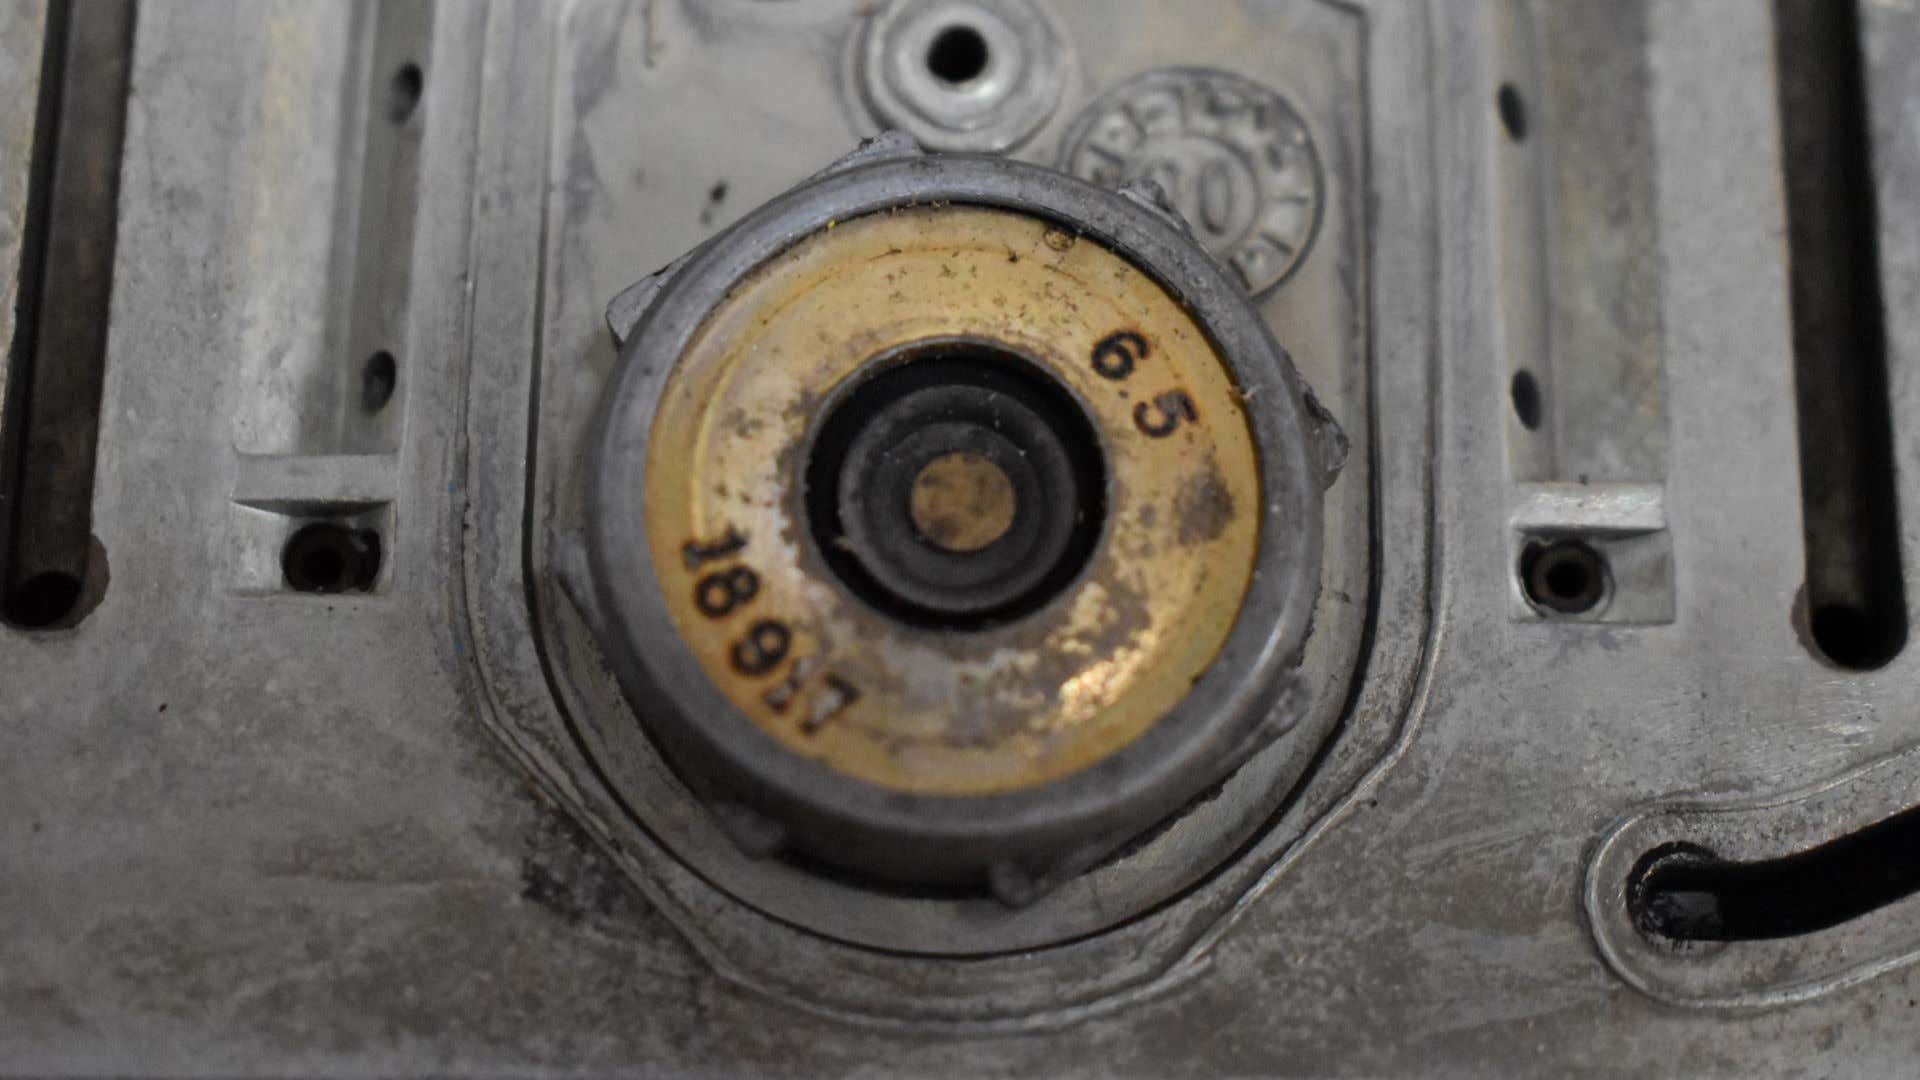 The power valve on a Holley carburetor.